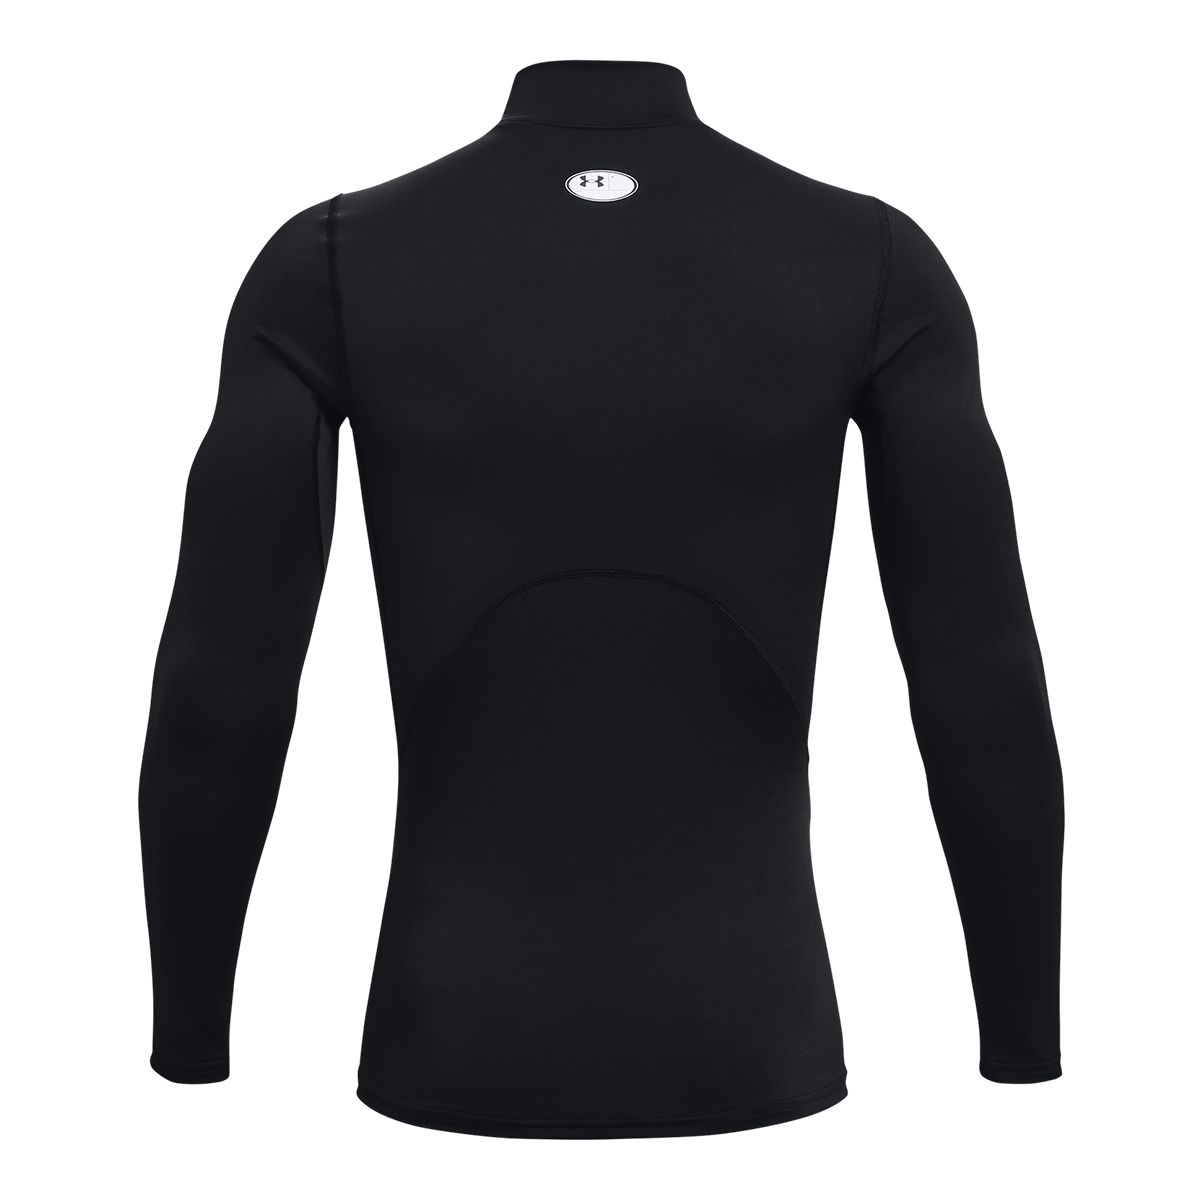 Under Armour Womens ColdGear Compression Mock Black Medium ** You can get  additional details at the image link.